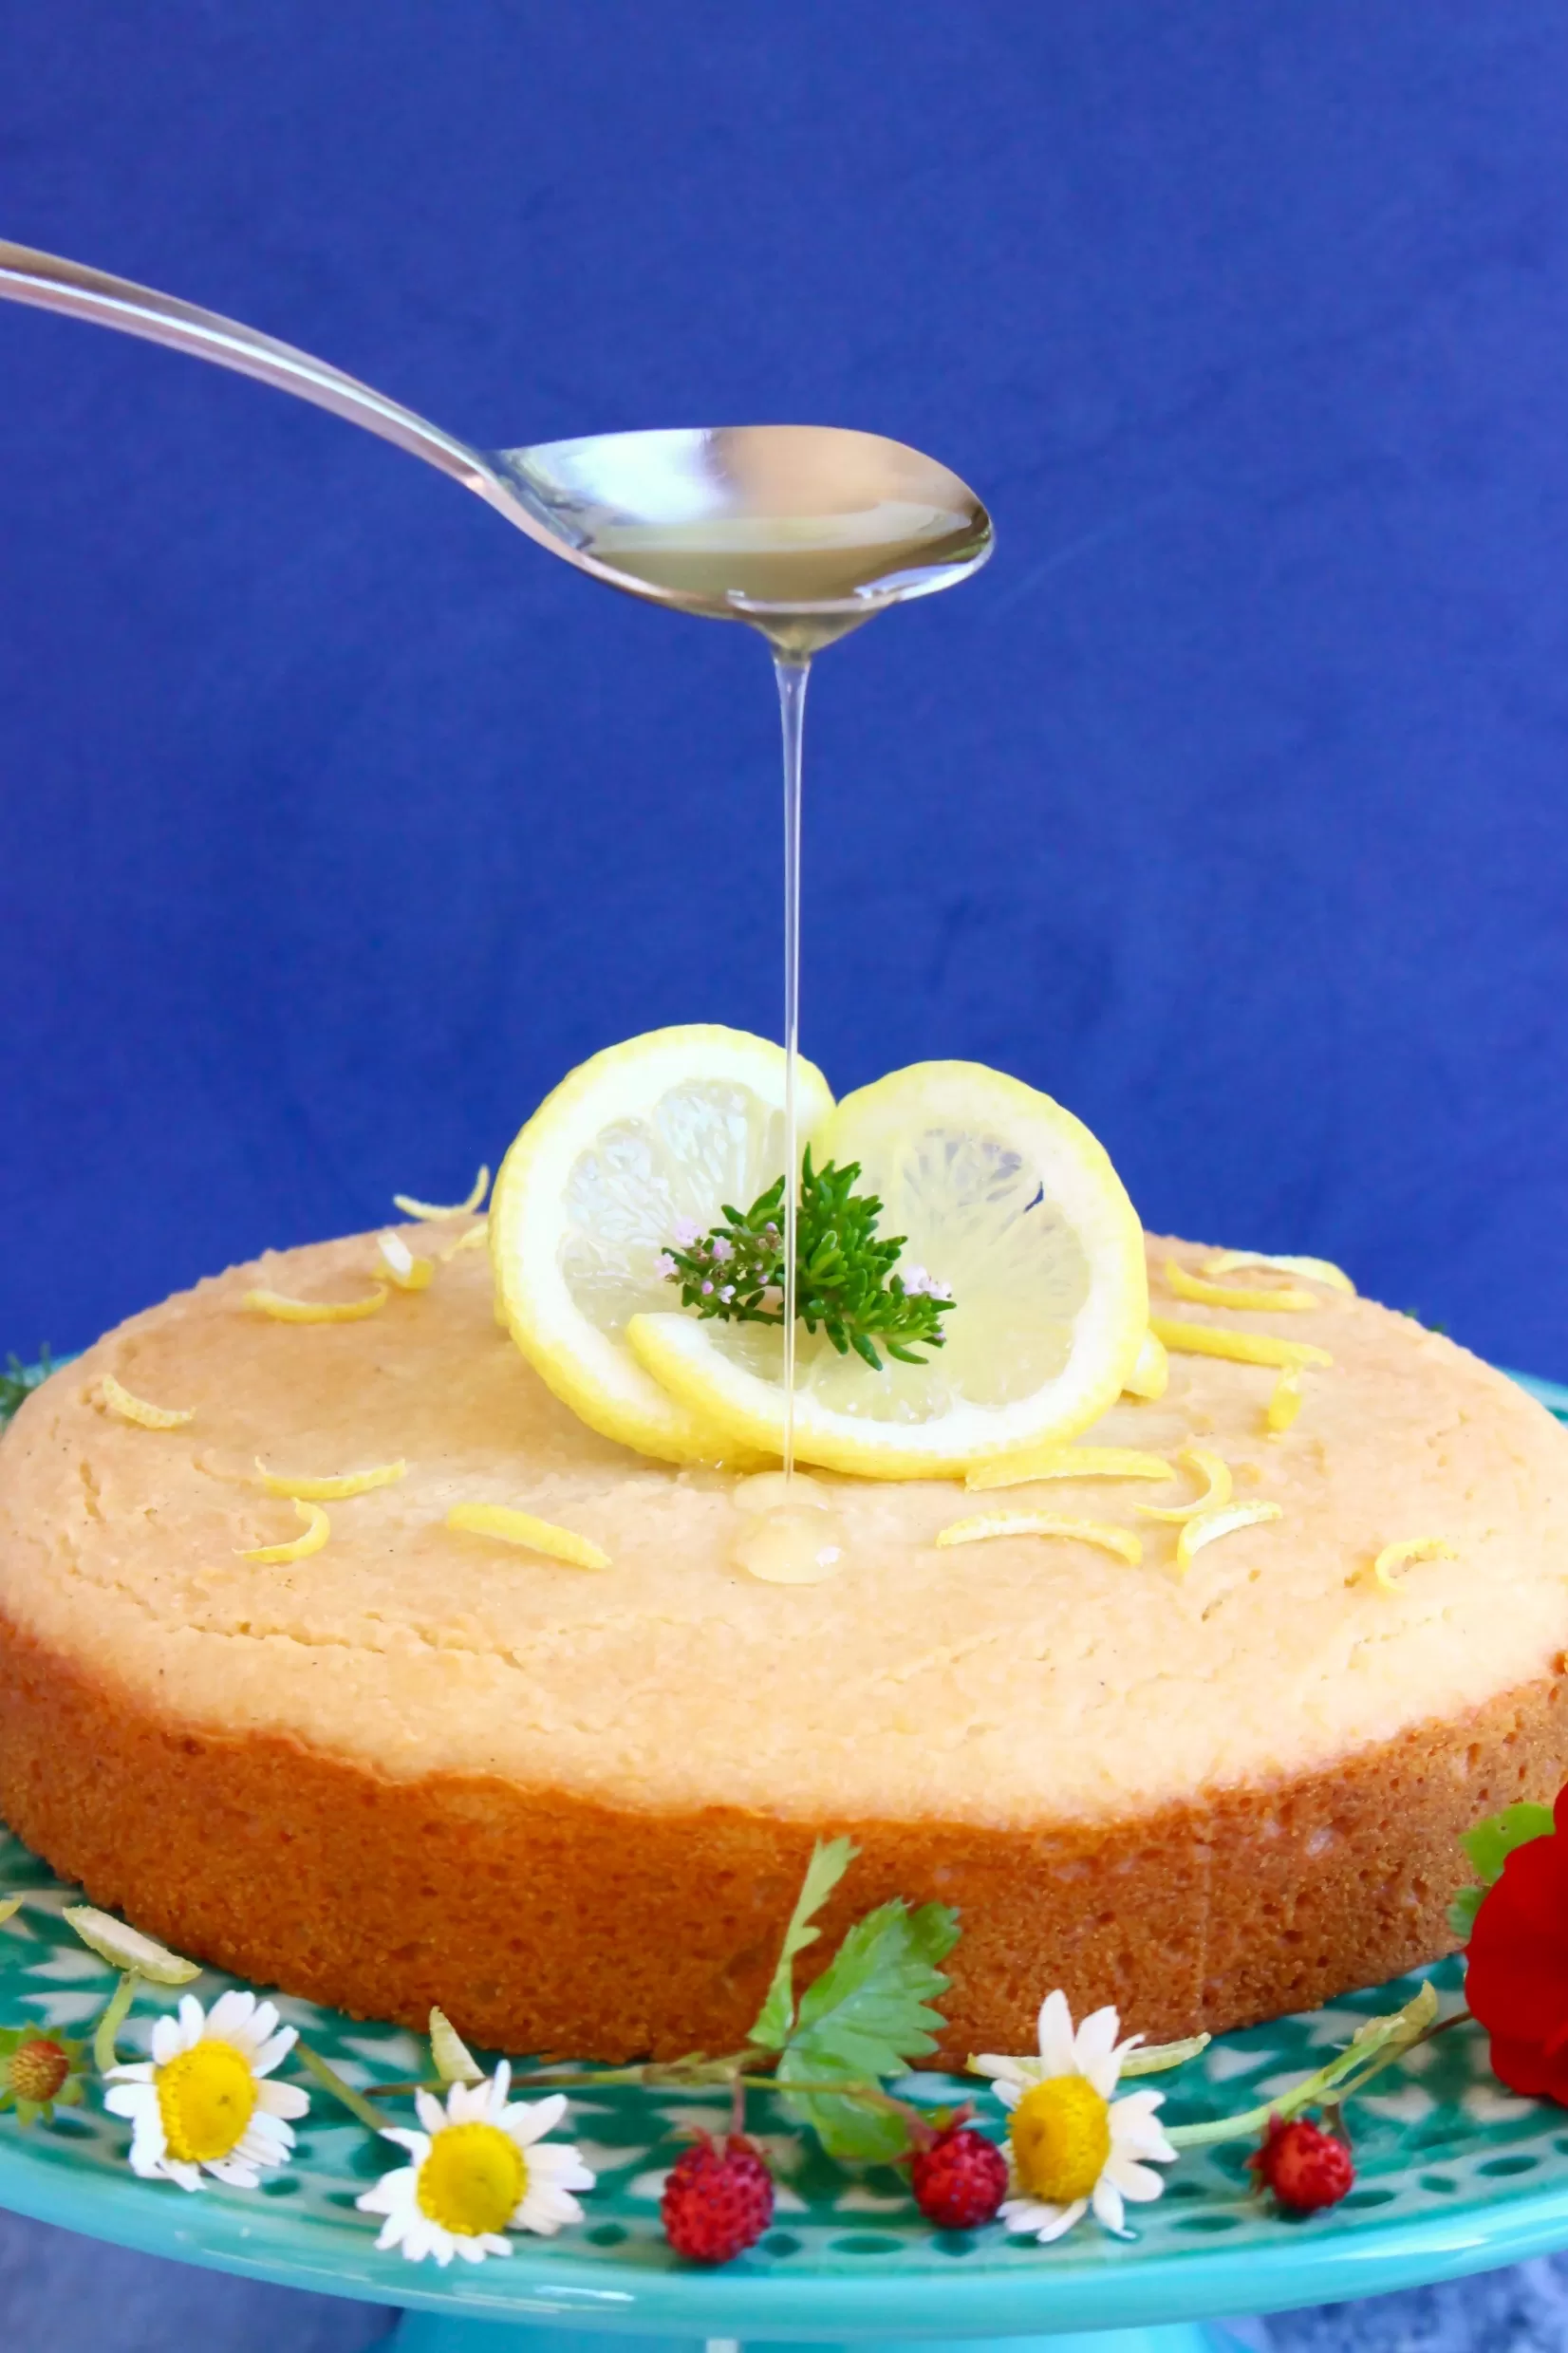 Gluten-free vegan lemon drizzle cake on a cake stand with a spoon drizzling syrup over it